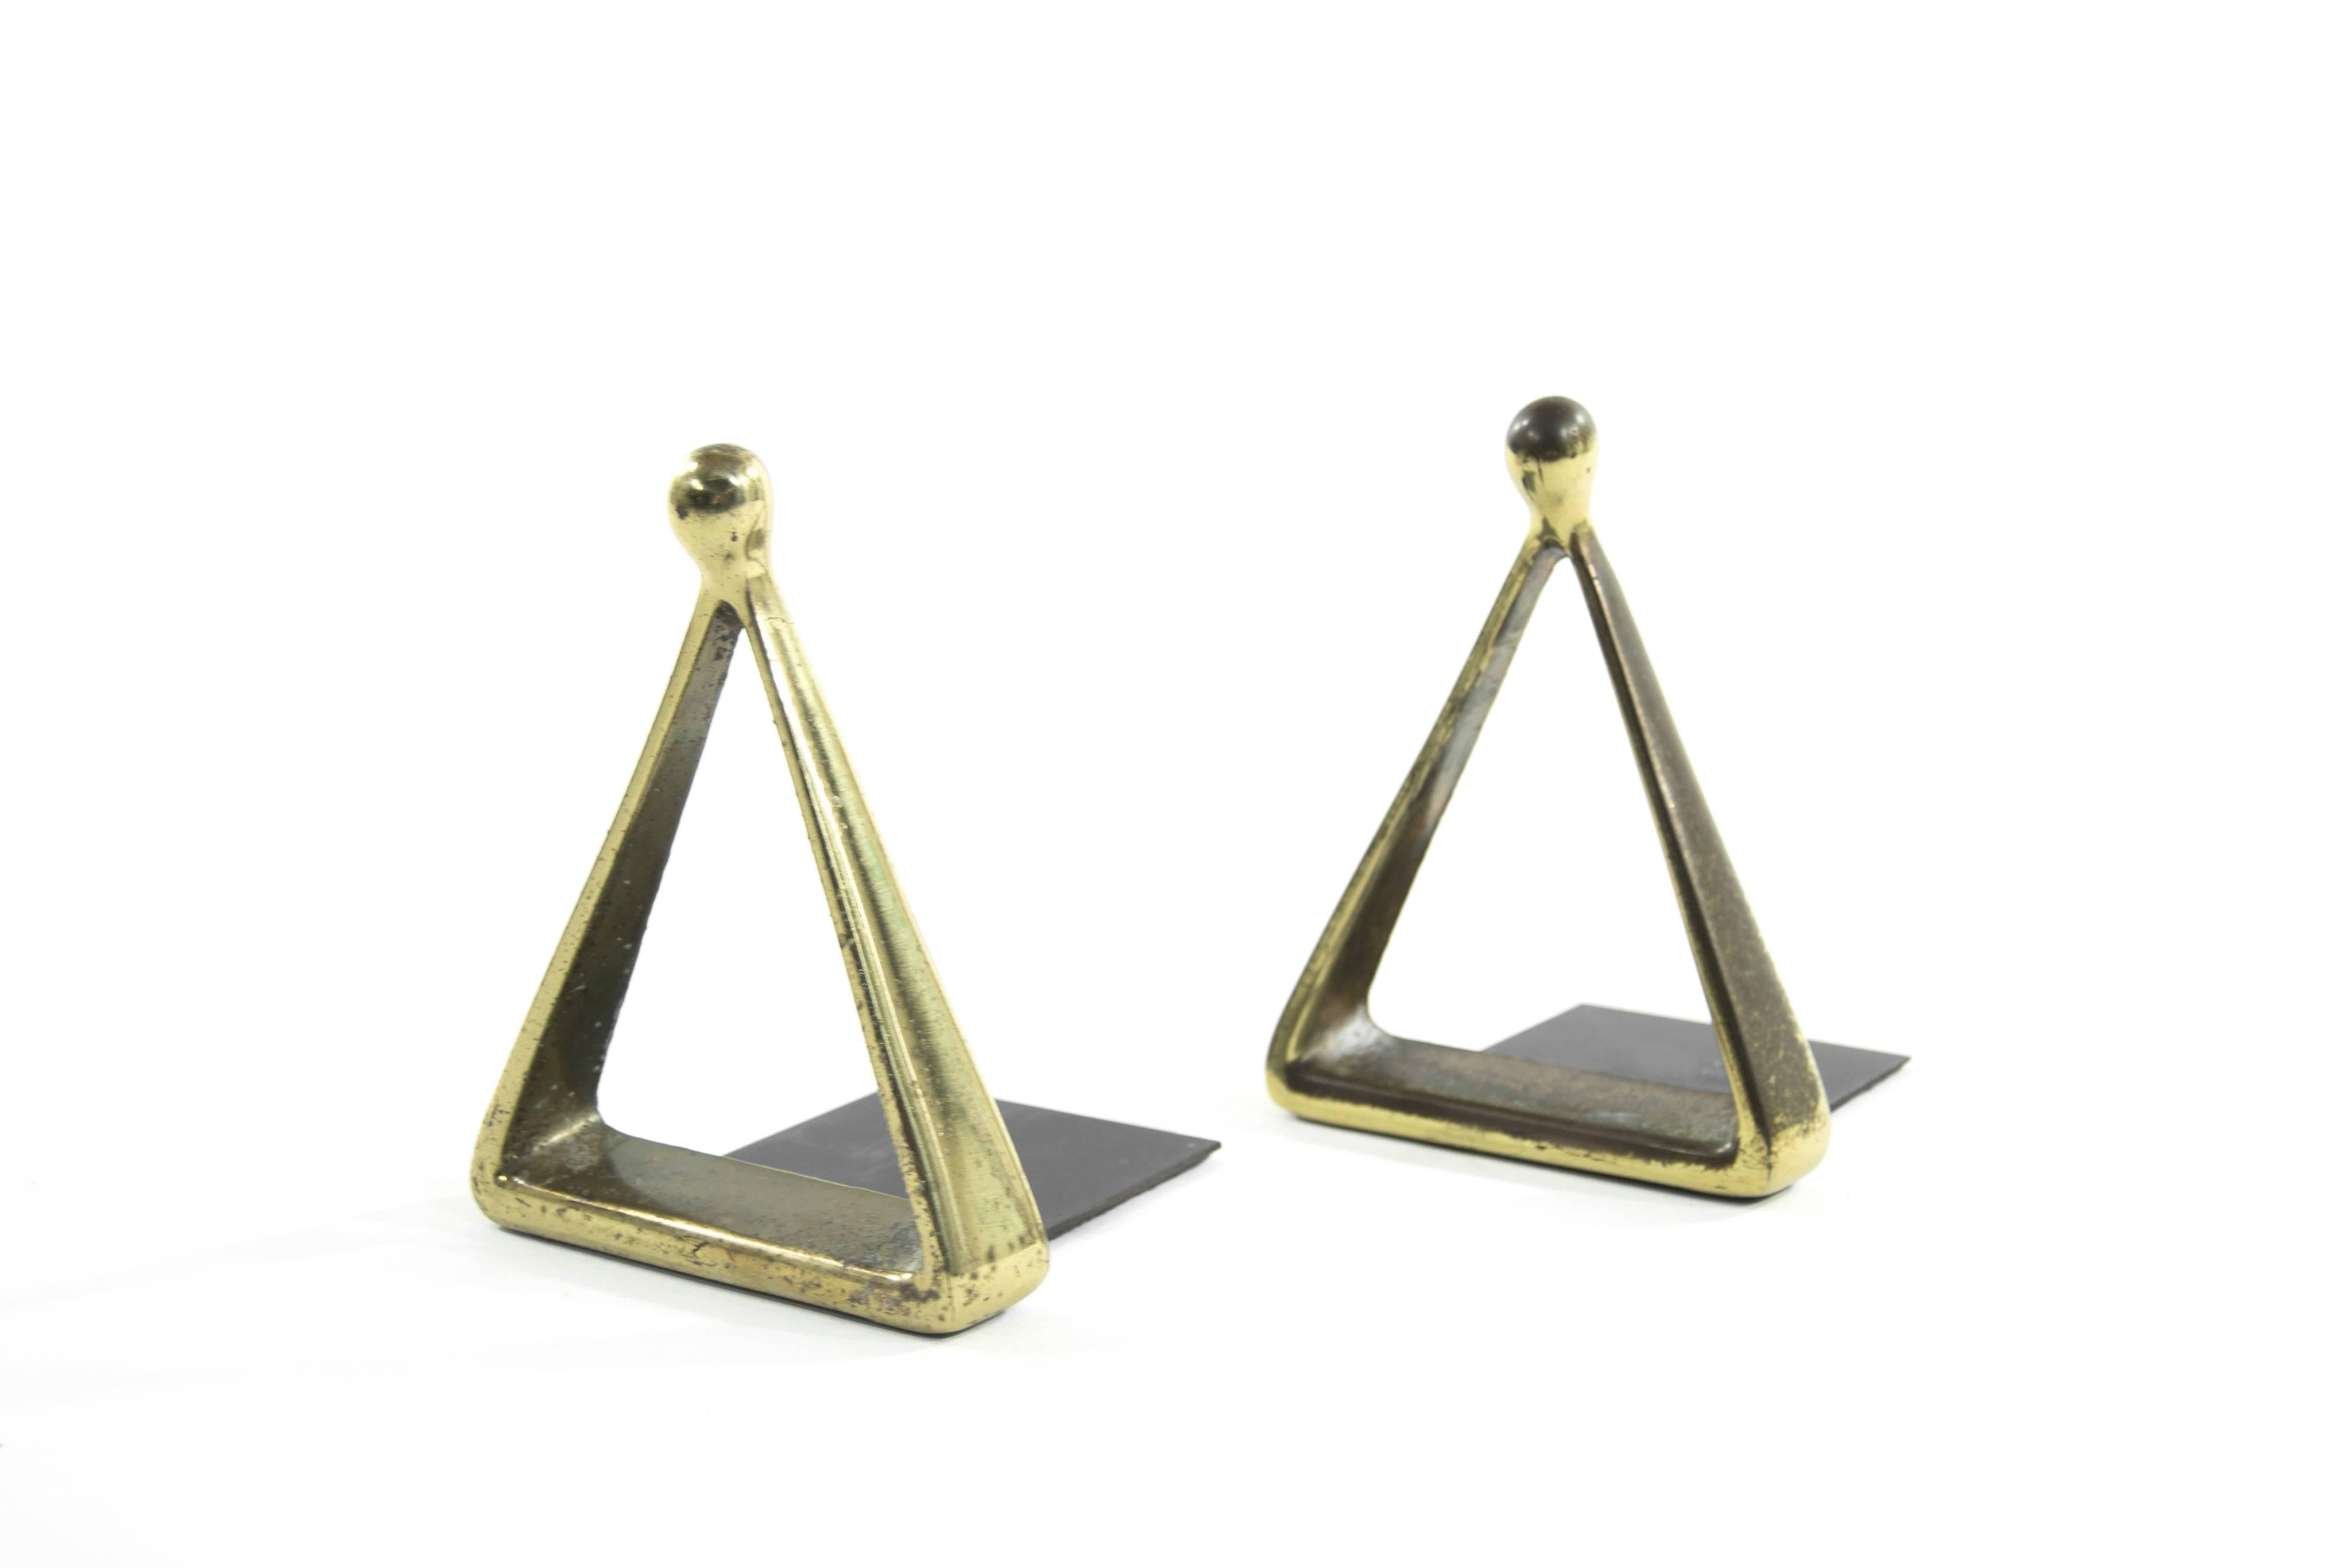 Stunning pair of patinated brass bookends by Ben Seibel for Jenfred Ware.